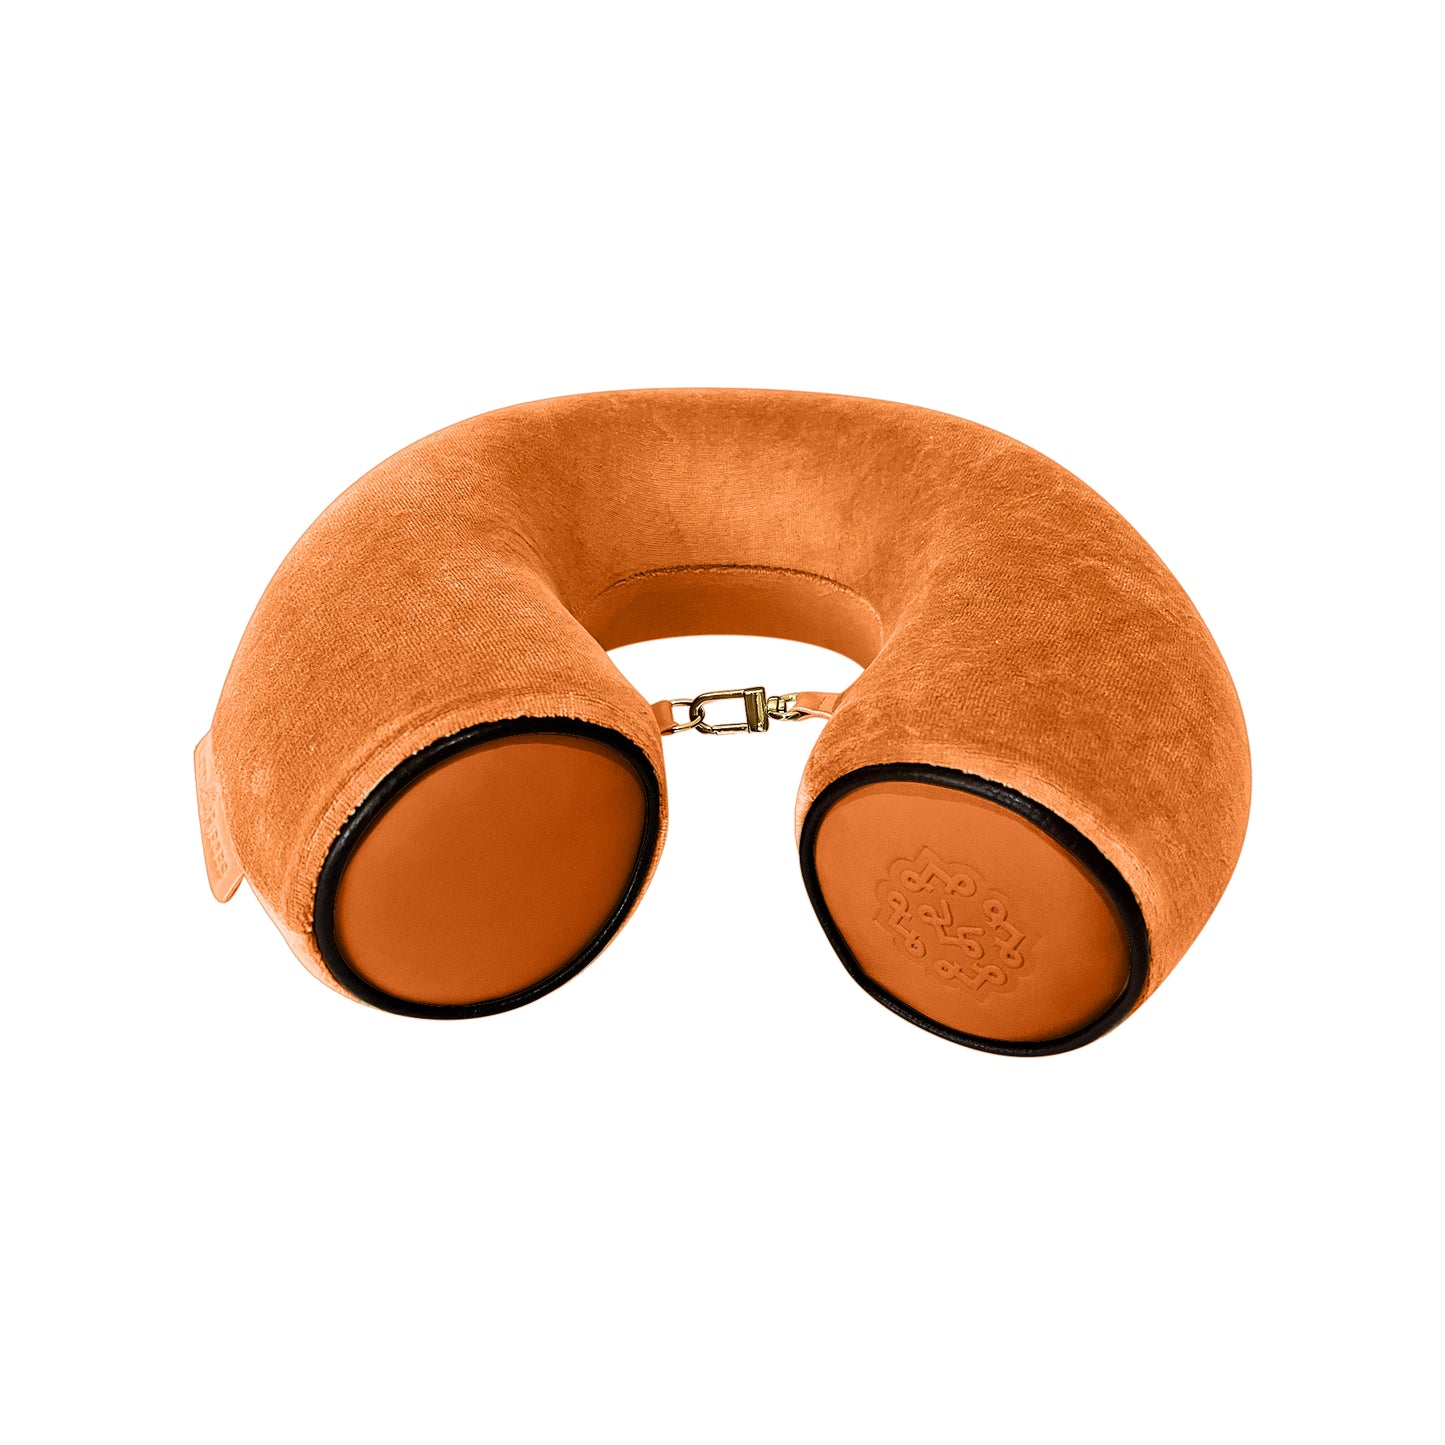 Lotta Pieces | Super Plush Travel Neck Pillow With Leather Tips